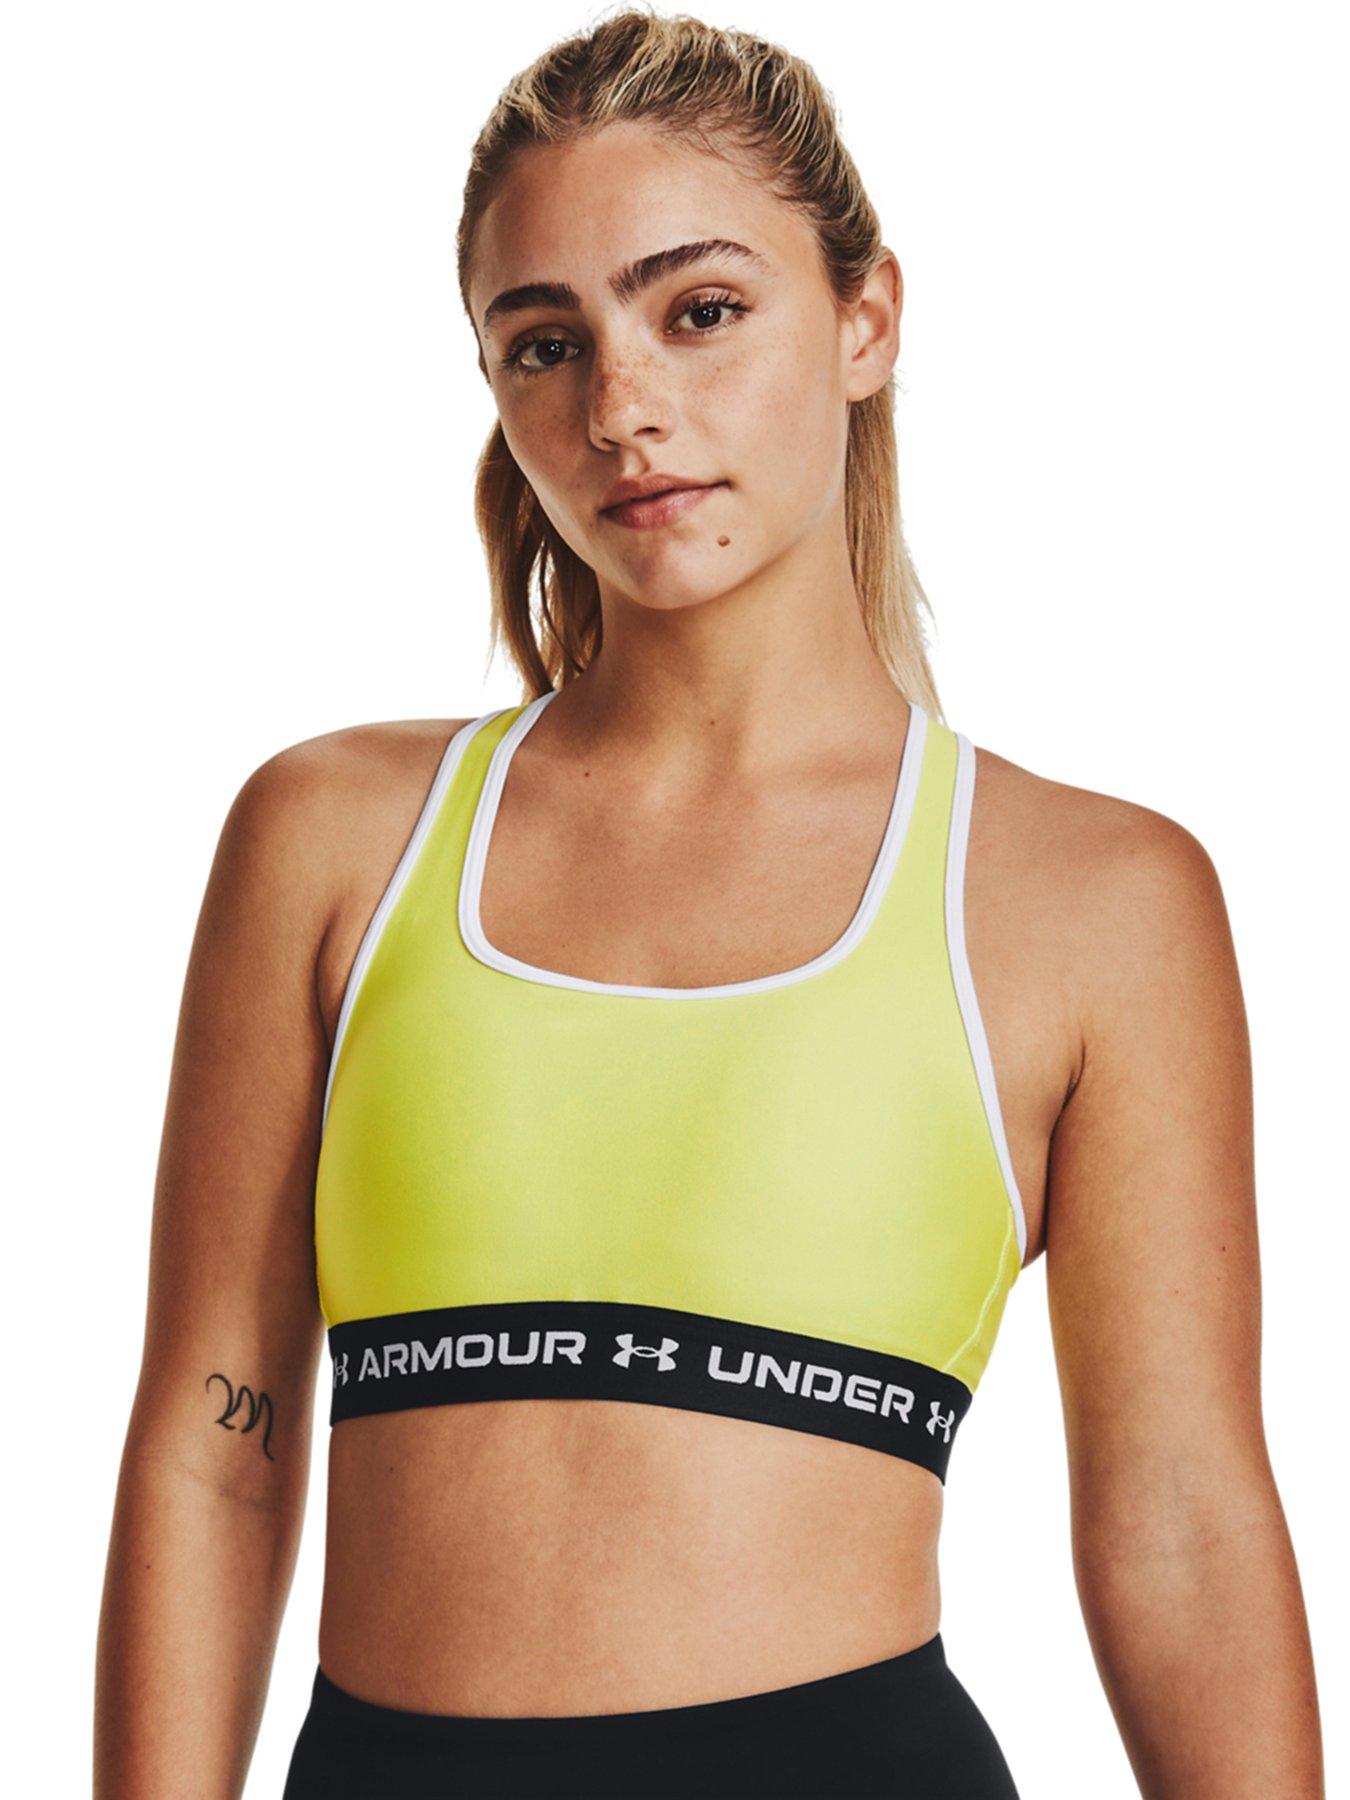 Under Armour Authentics mid support padless sports bra in purple